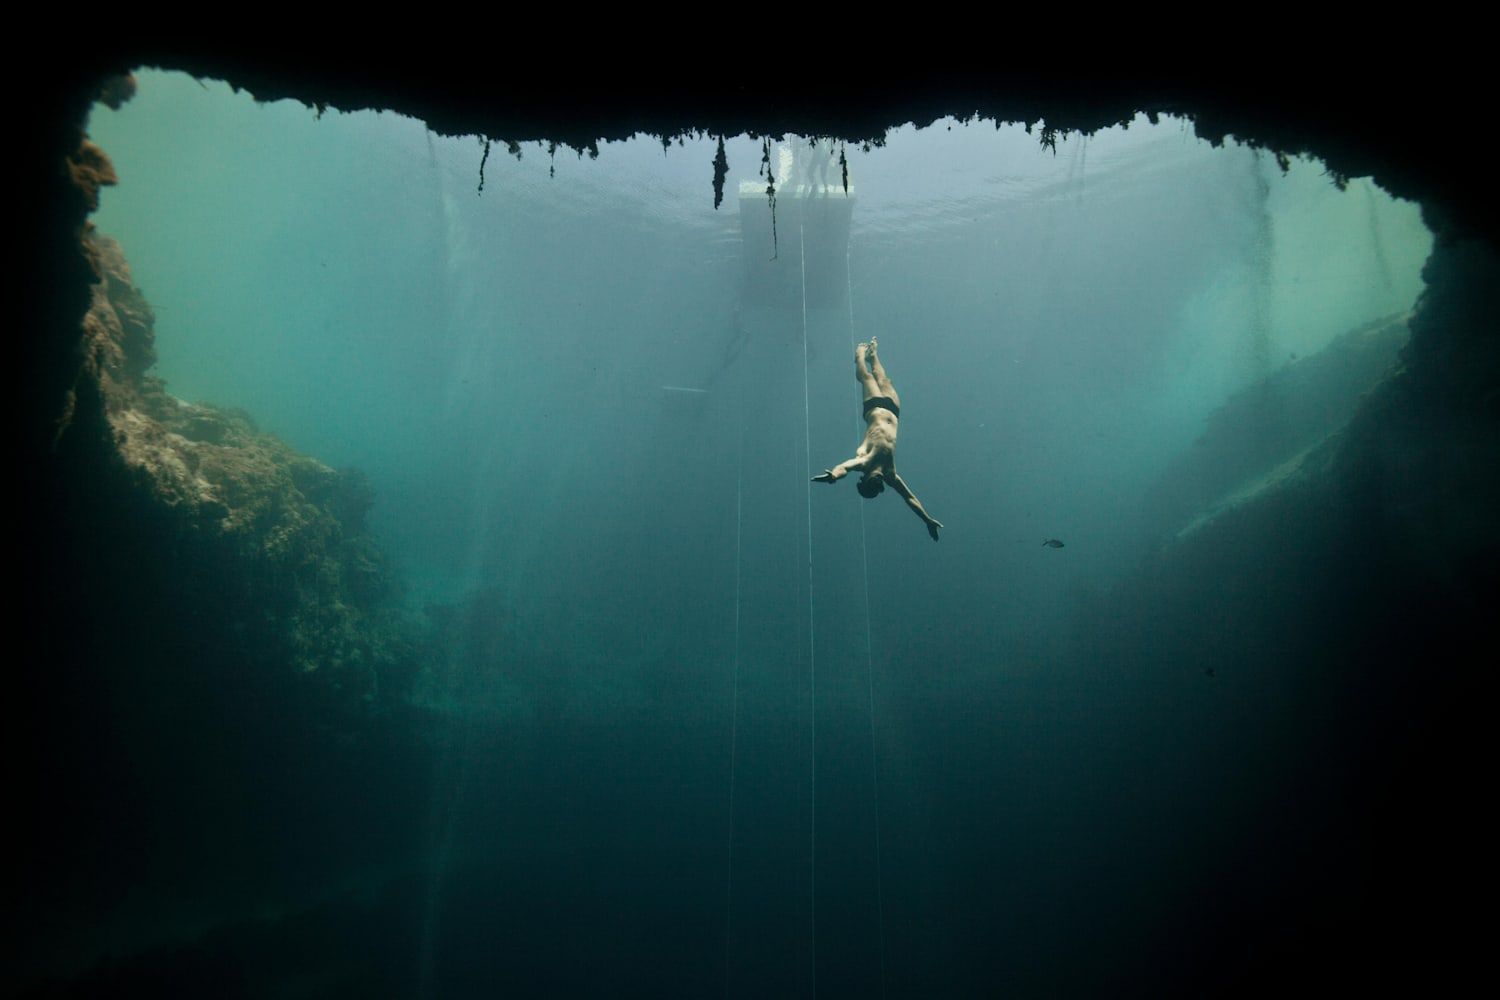 Freediving photo: Incredible image to inspire